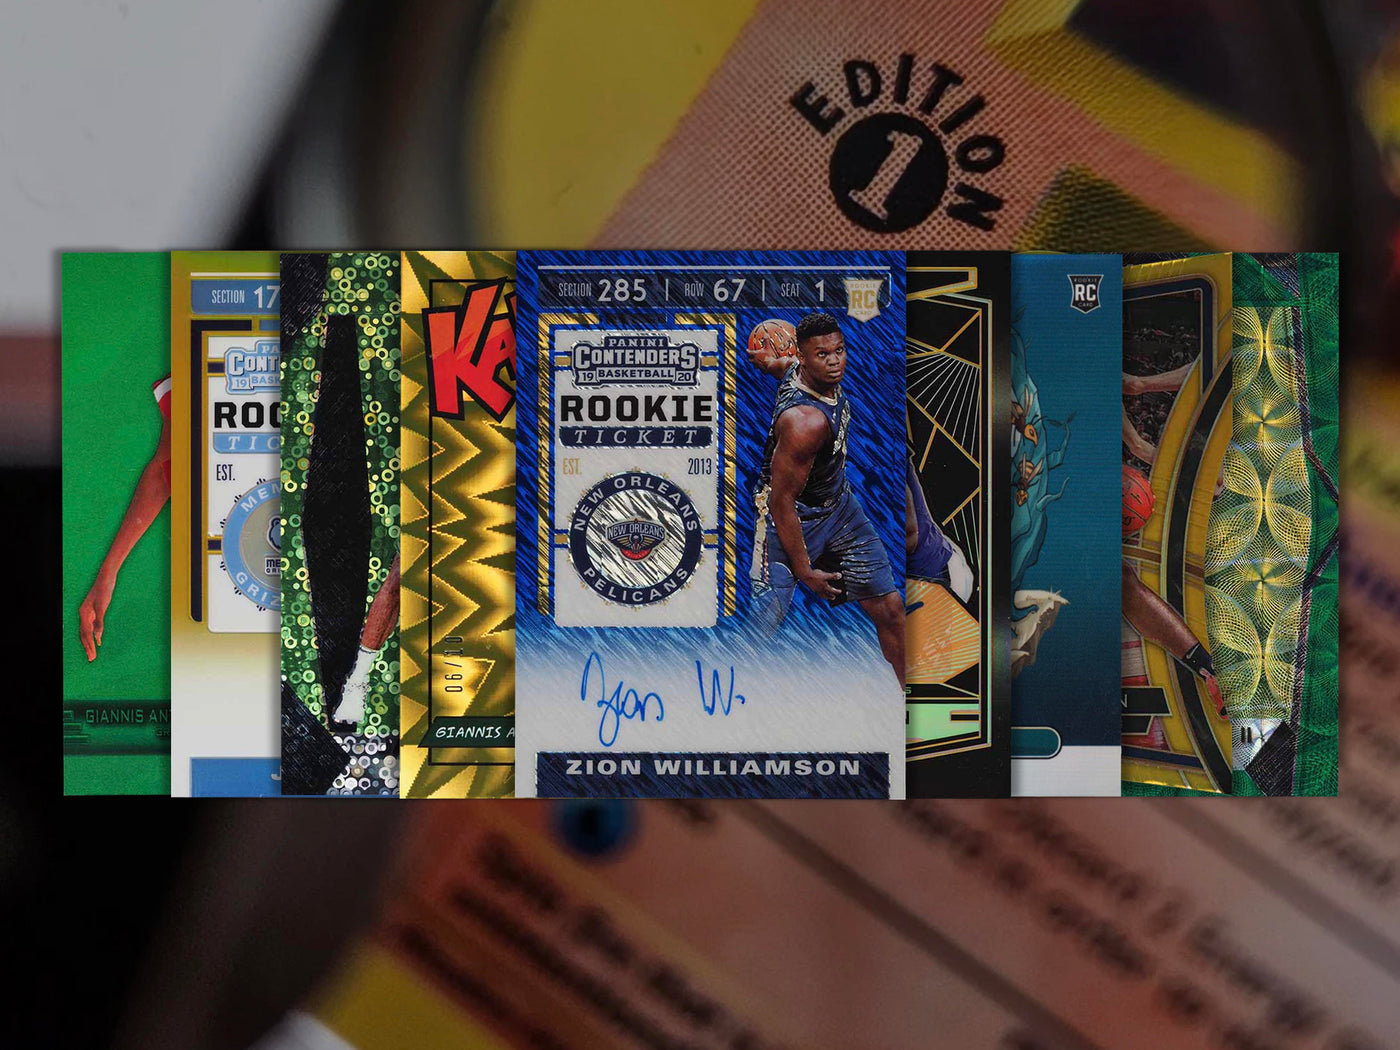 Image of eight overlapping raw insert cards including a Zion Williamson Blue Shimmer Auto, a Gold Kaboom, a Green PMG, a Downtown, a Die-cut card, and others